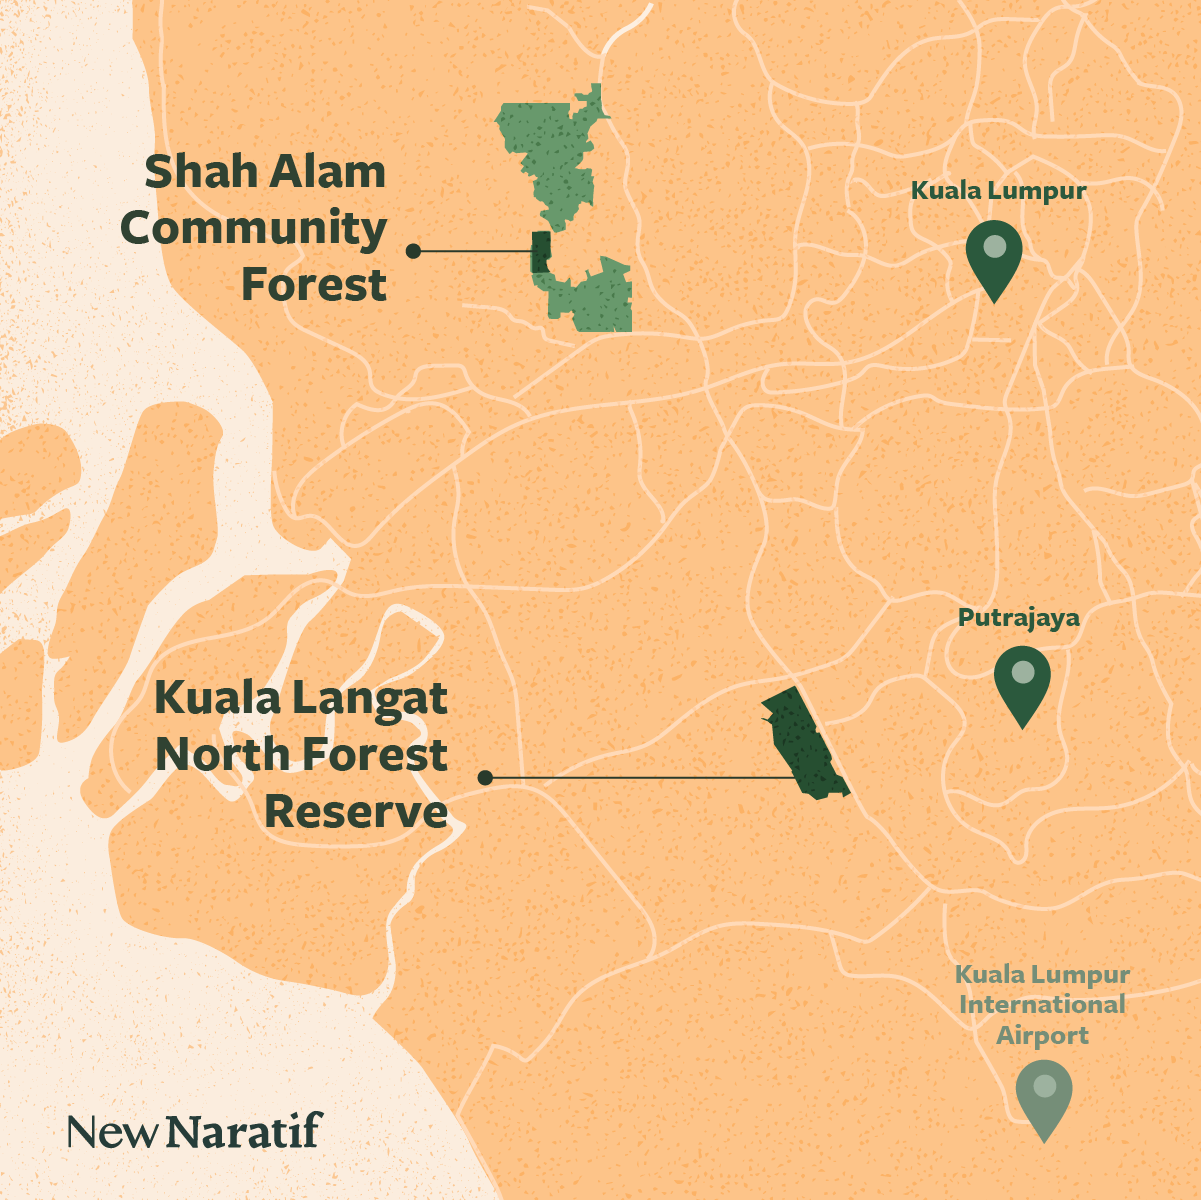 Map showing Sham Alam Community Forest and Kuala Langat North Forest Reserve, in relation to Kuala Lumpur, Putrajaya and Kuala Lumpur International Airport